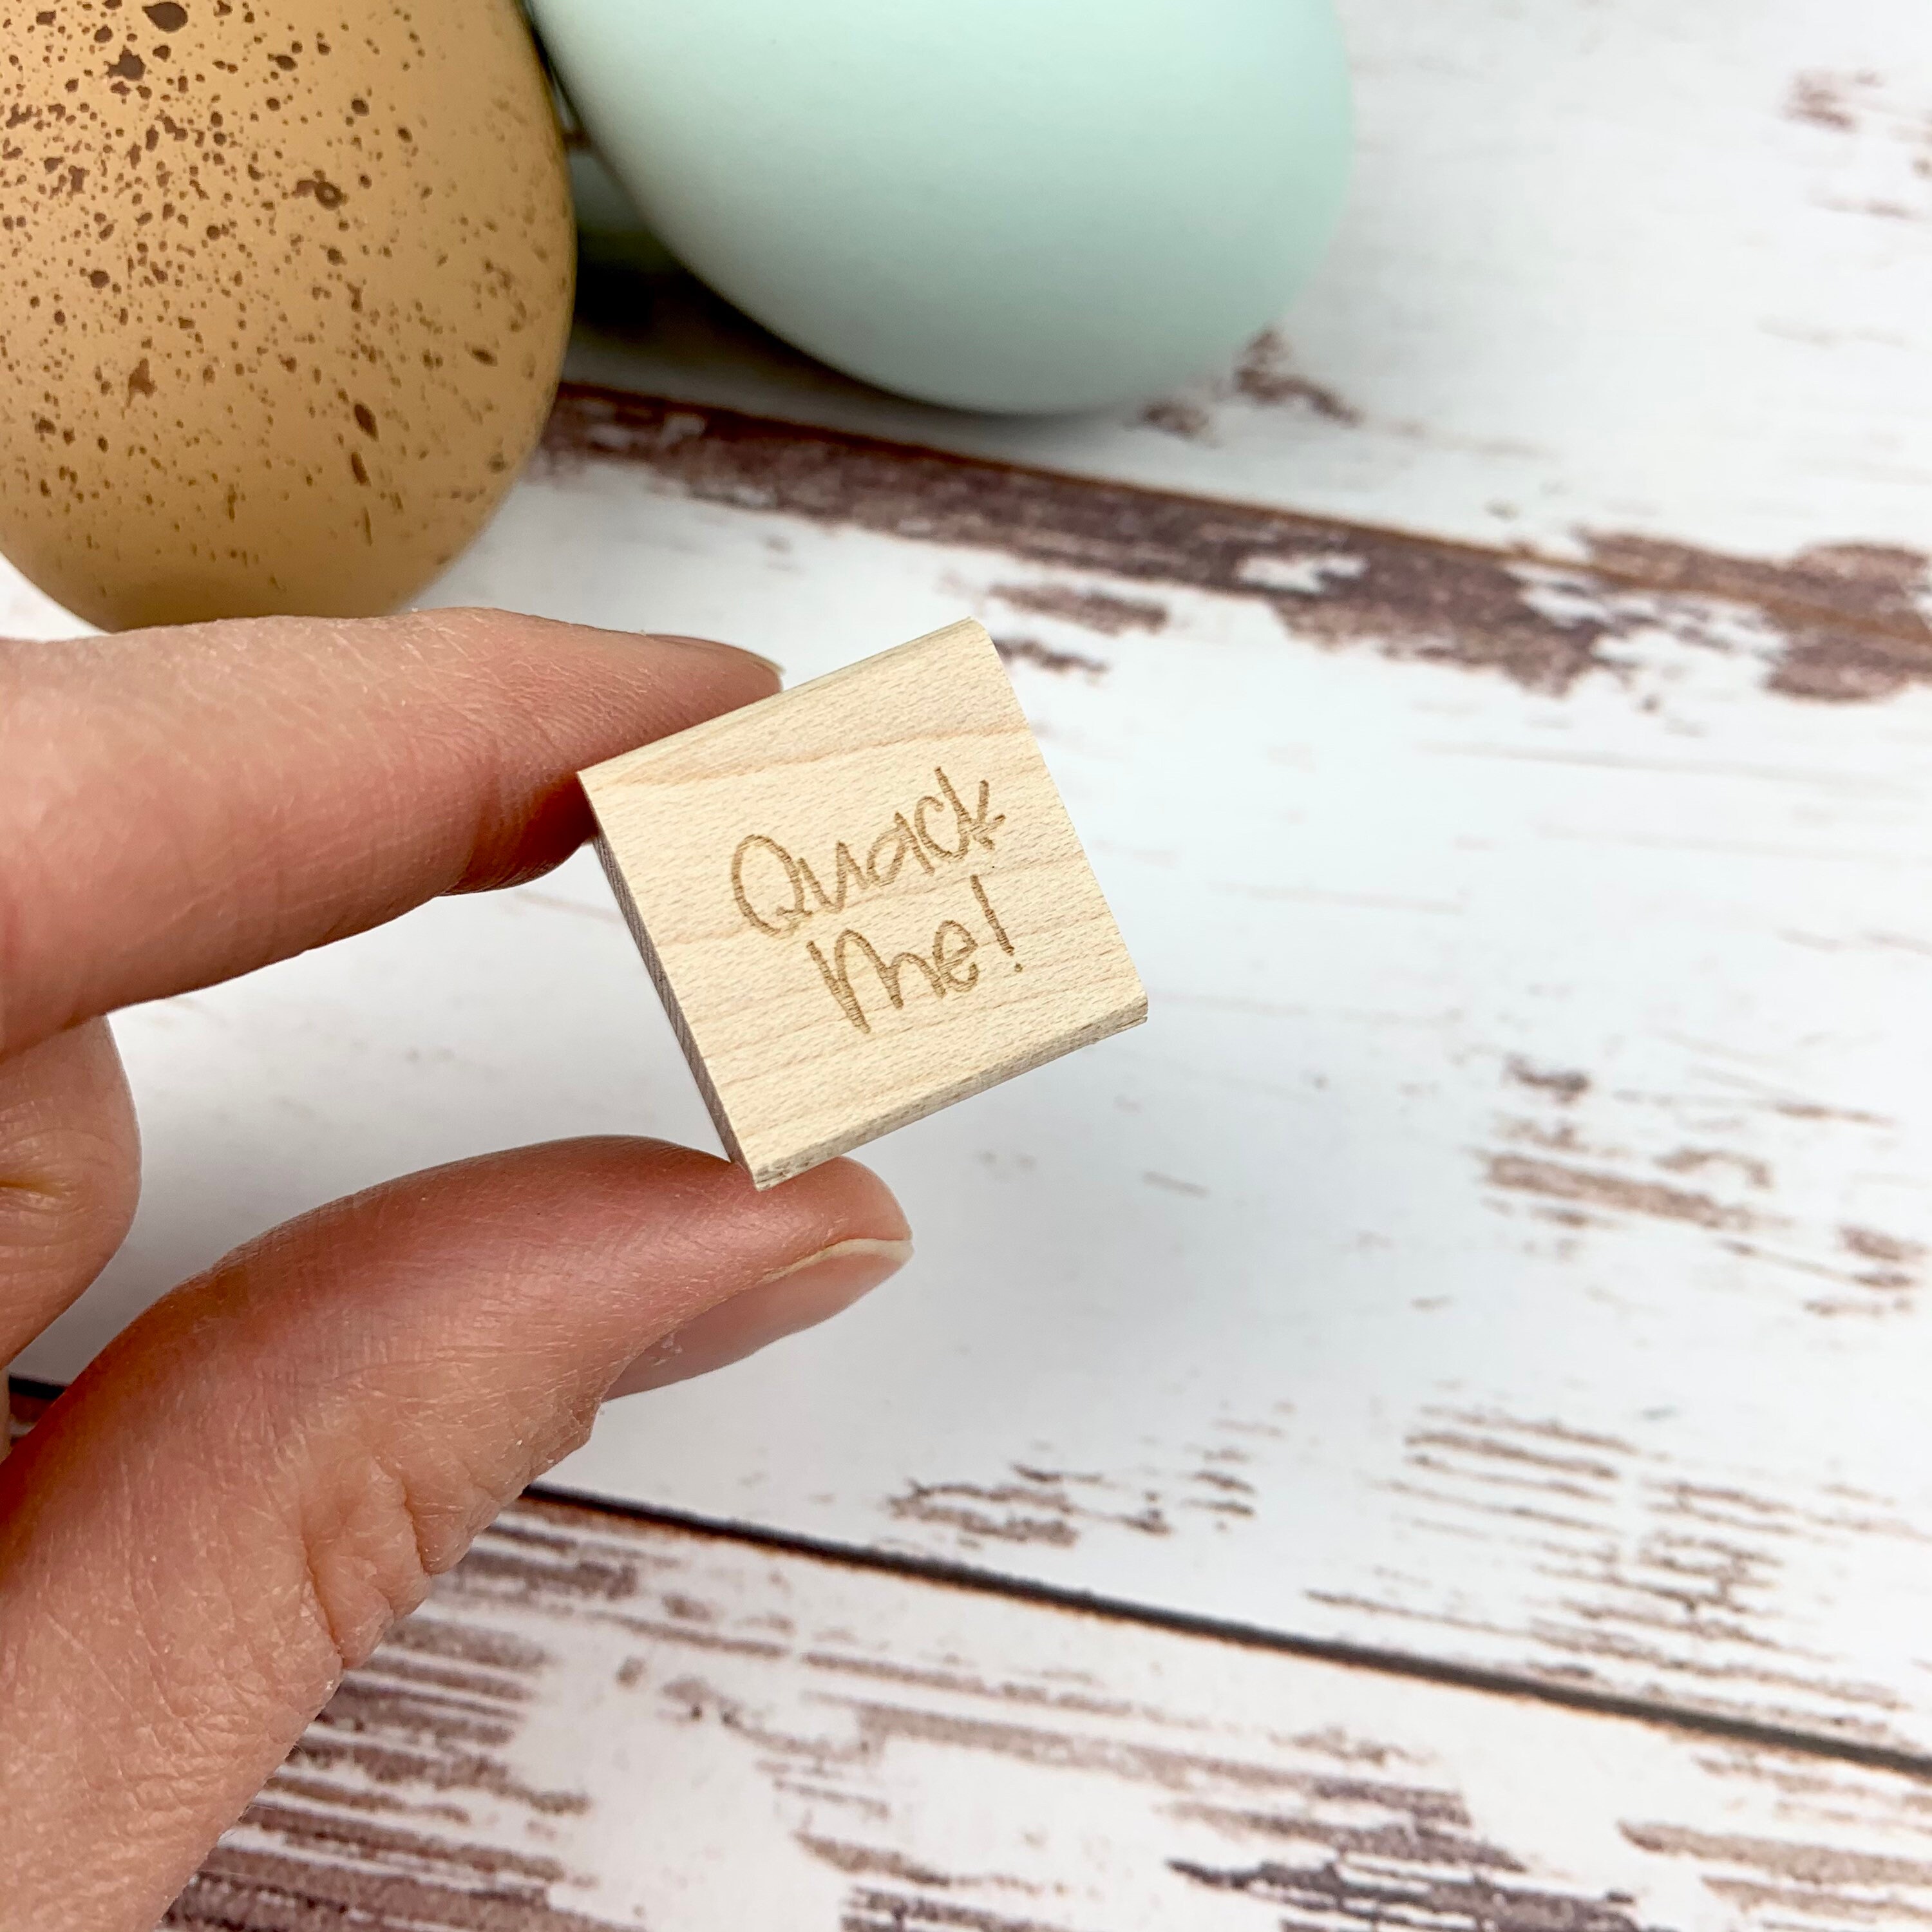 Farm Fresh Duck Egg Carton Perpetual Calendar Date Gathered Square Rubber  Stamp for Stamping Crafting